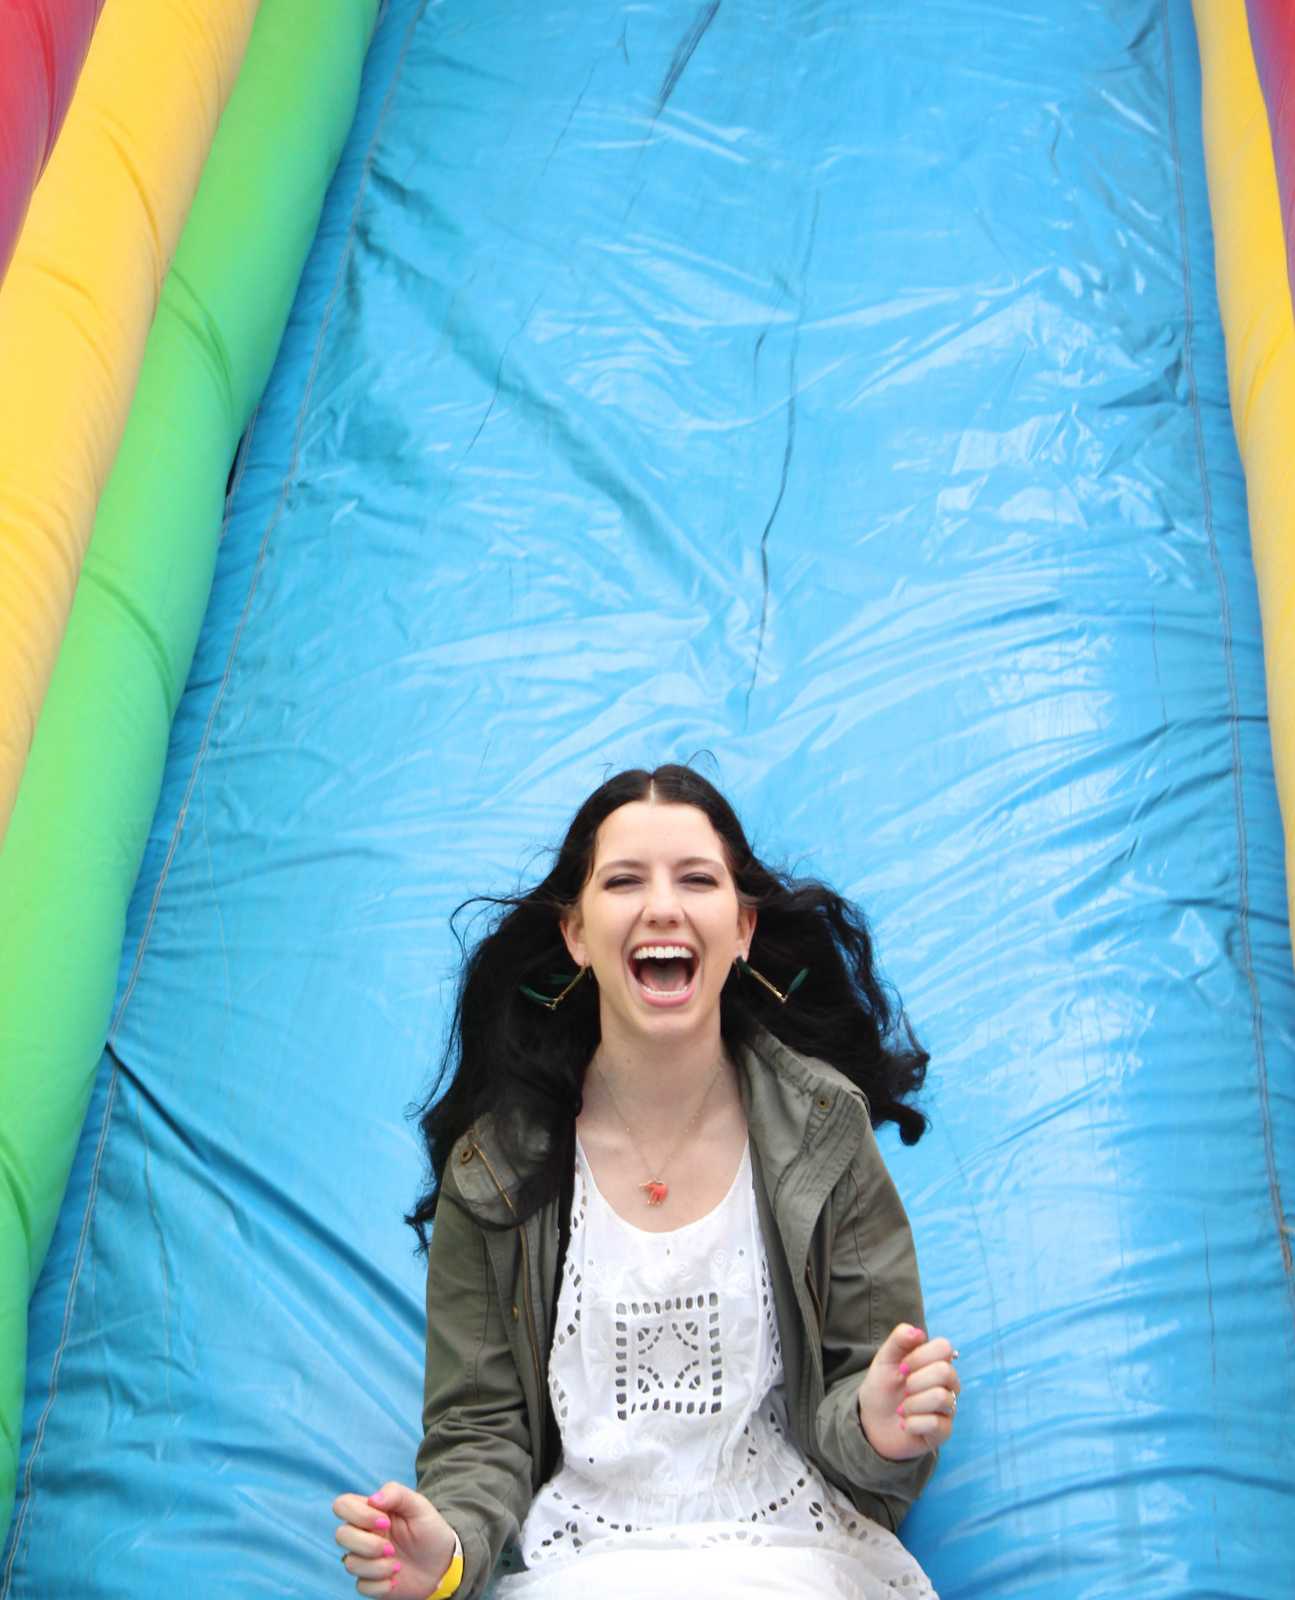 Nicole Santoni, Sophomore, slides down an inflatable slide at the SF State ASI Kick-Off on Wednesday, Sept. 4, 2013. The Kick-Off was carnival themed, having ring toss, cotton candy, inflatable slides and other carnival classics. Photo Ryan Leibrich / Xpress